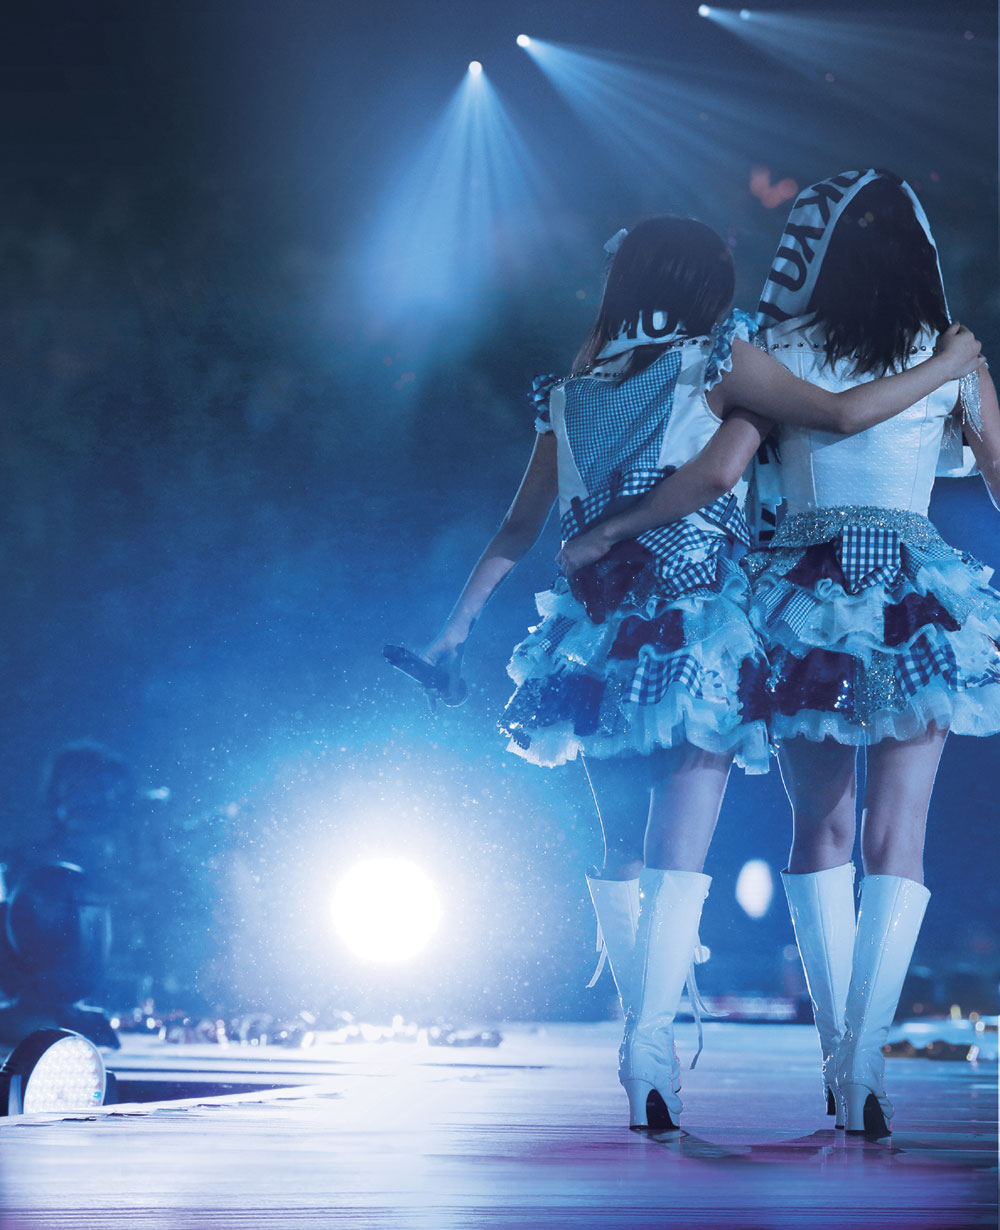 [Movie Trailer #3] DOCUMENTARY OF AKB48 NO FLOWER WITHOUT RAIN/AKB48